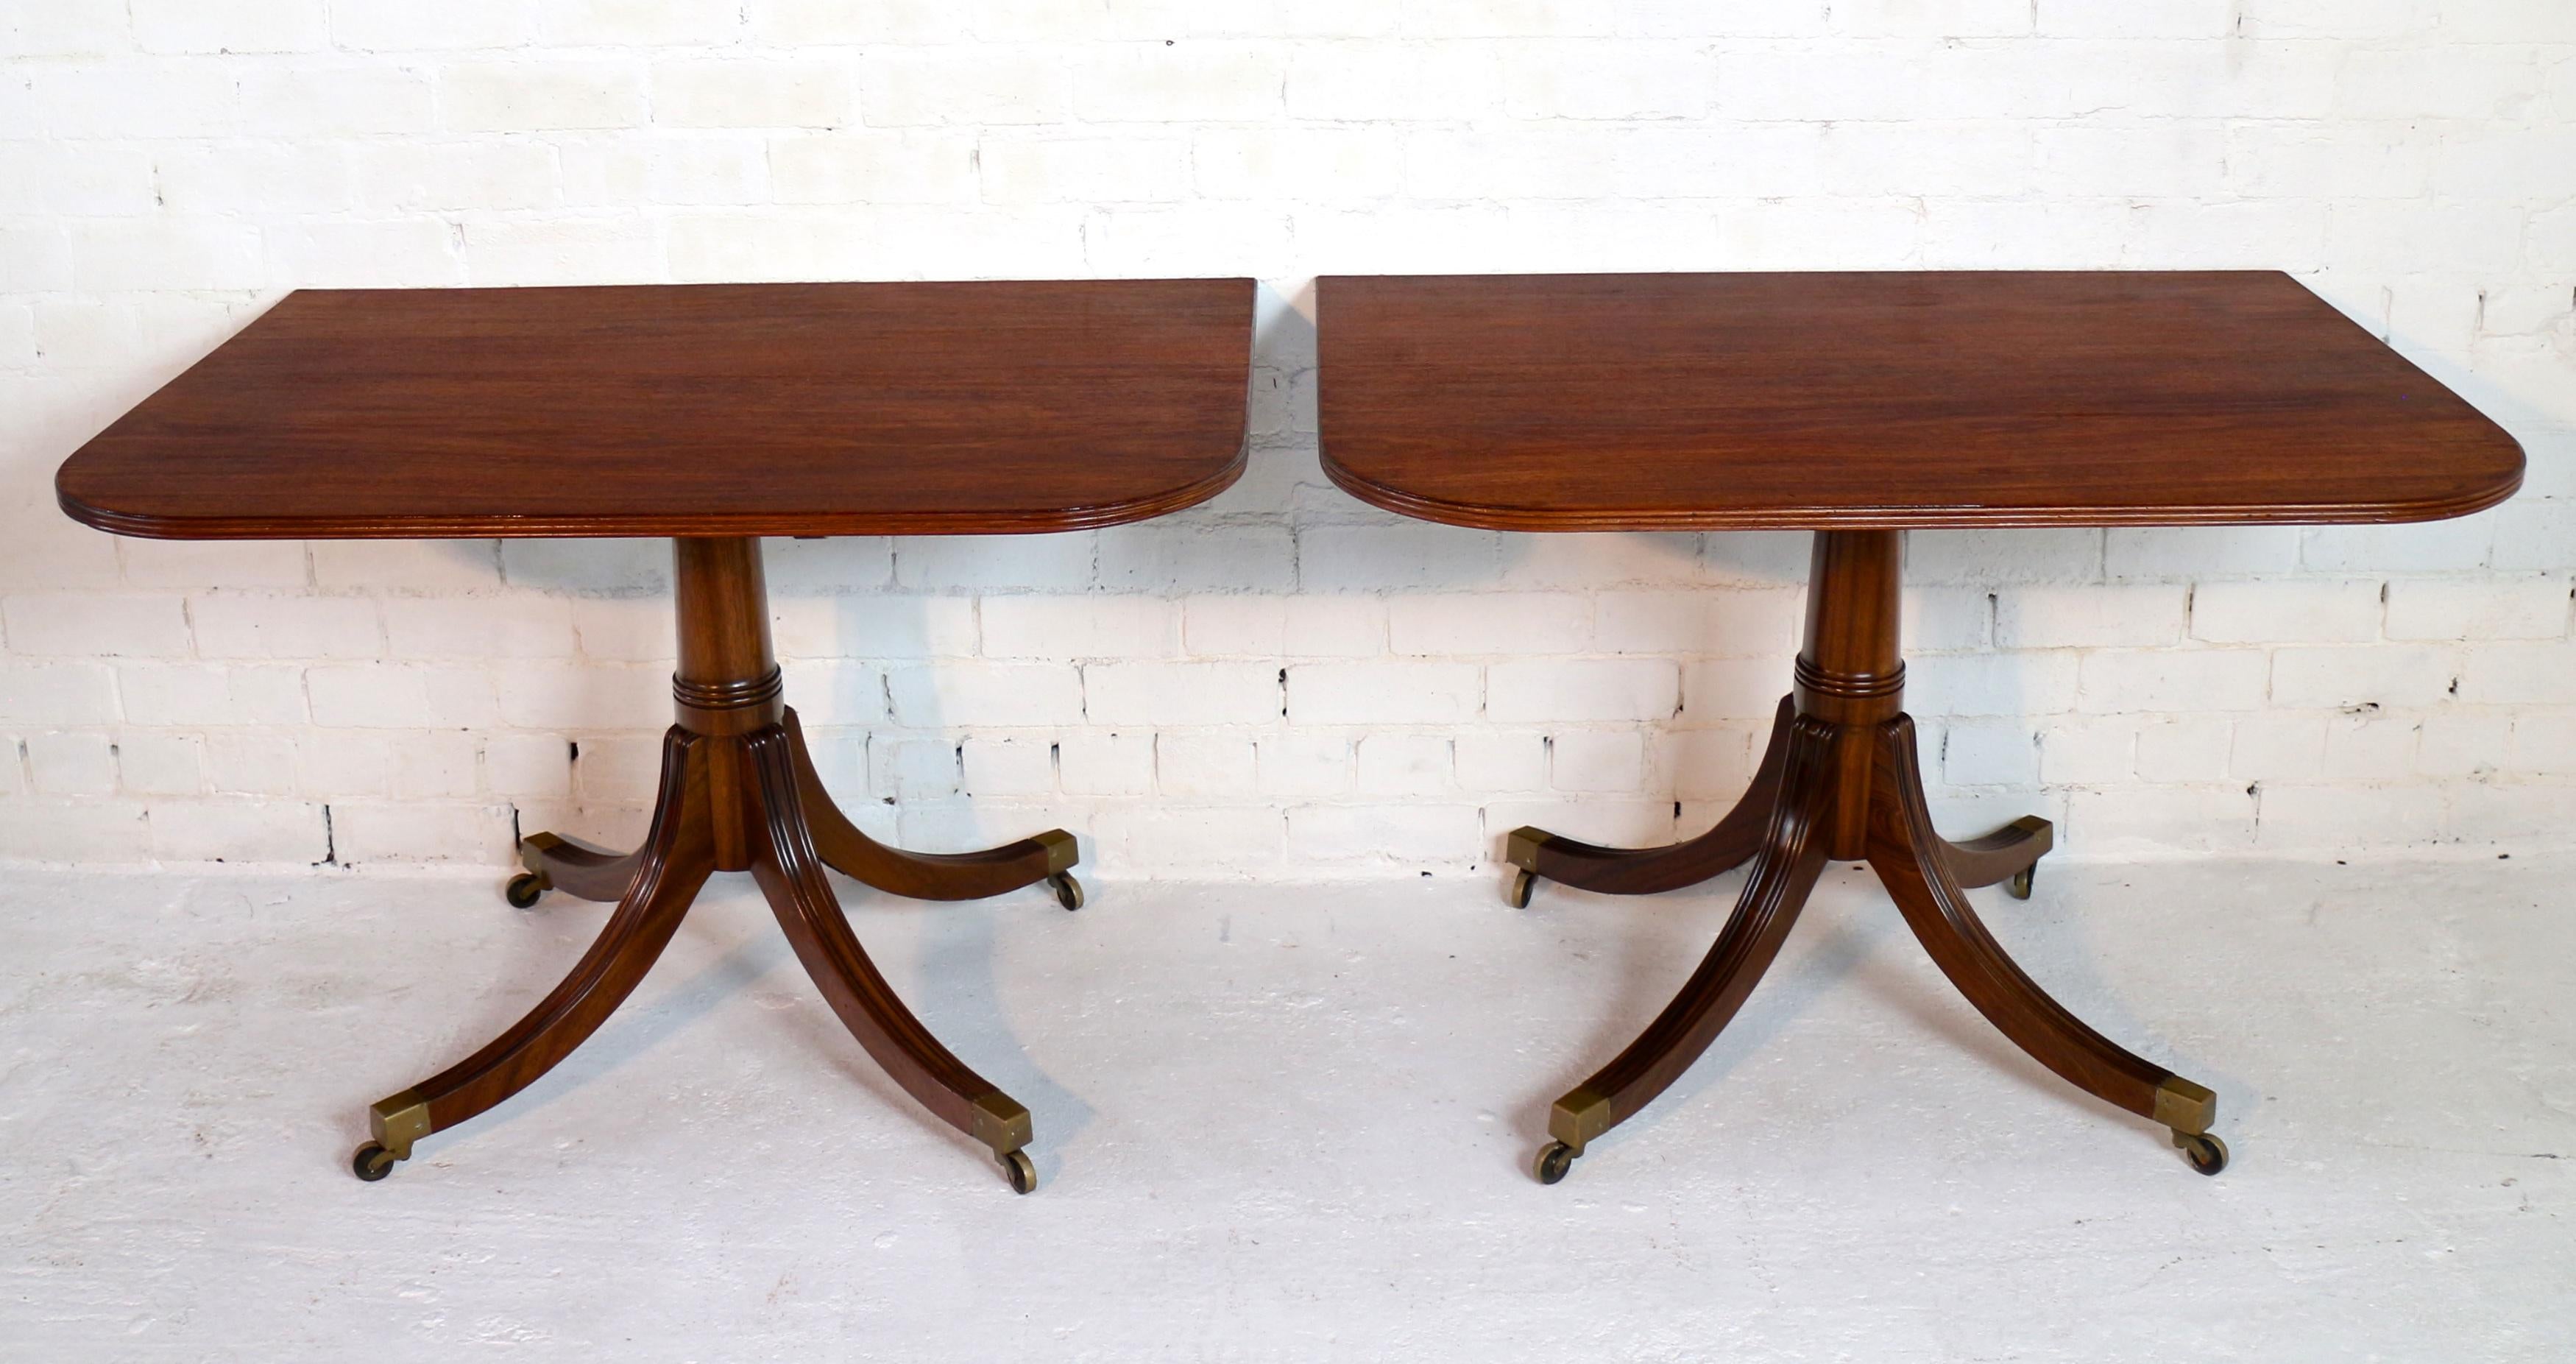 Regency Style Solid Mahogany Twin Pillar Dining Table/Pair Side Tables, Seats 8 5